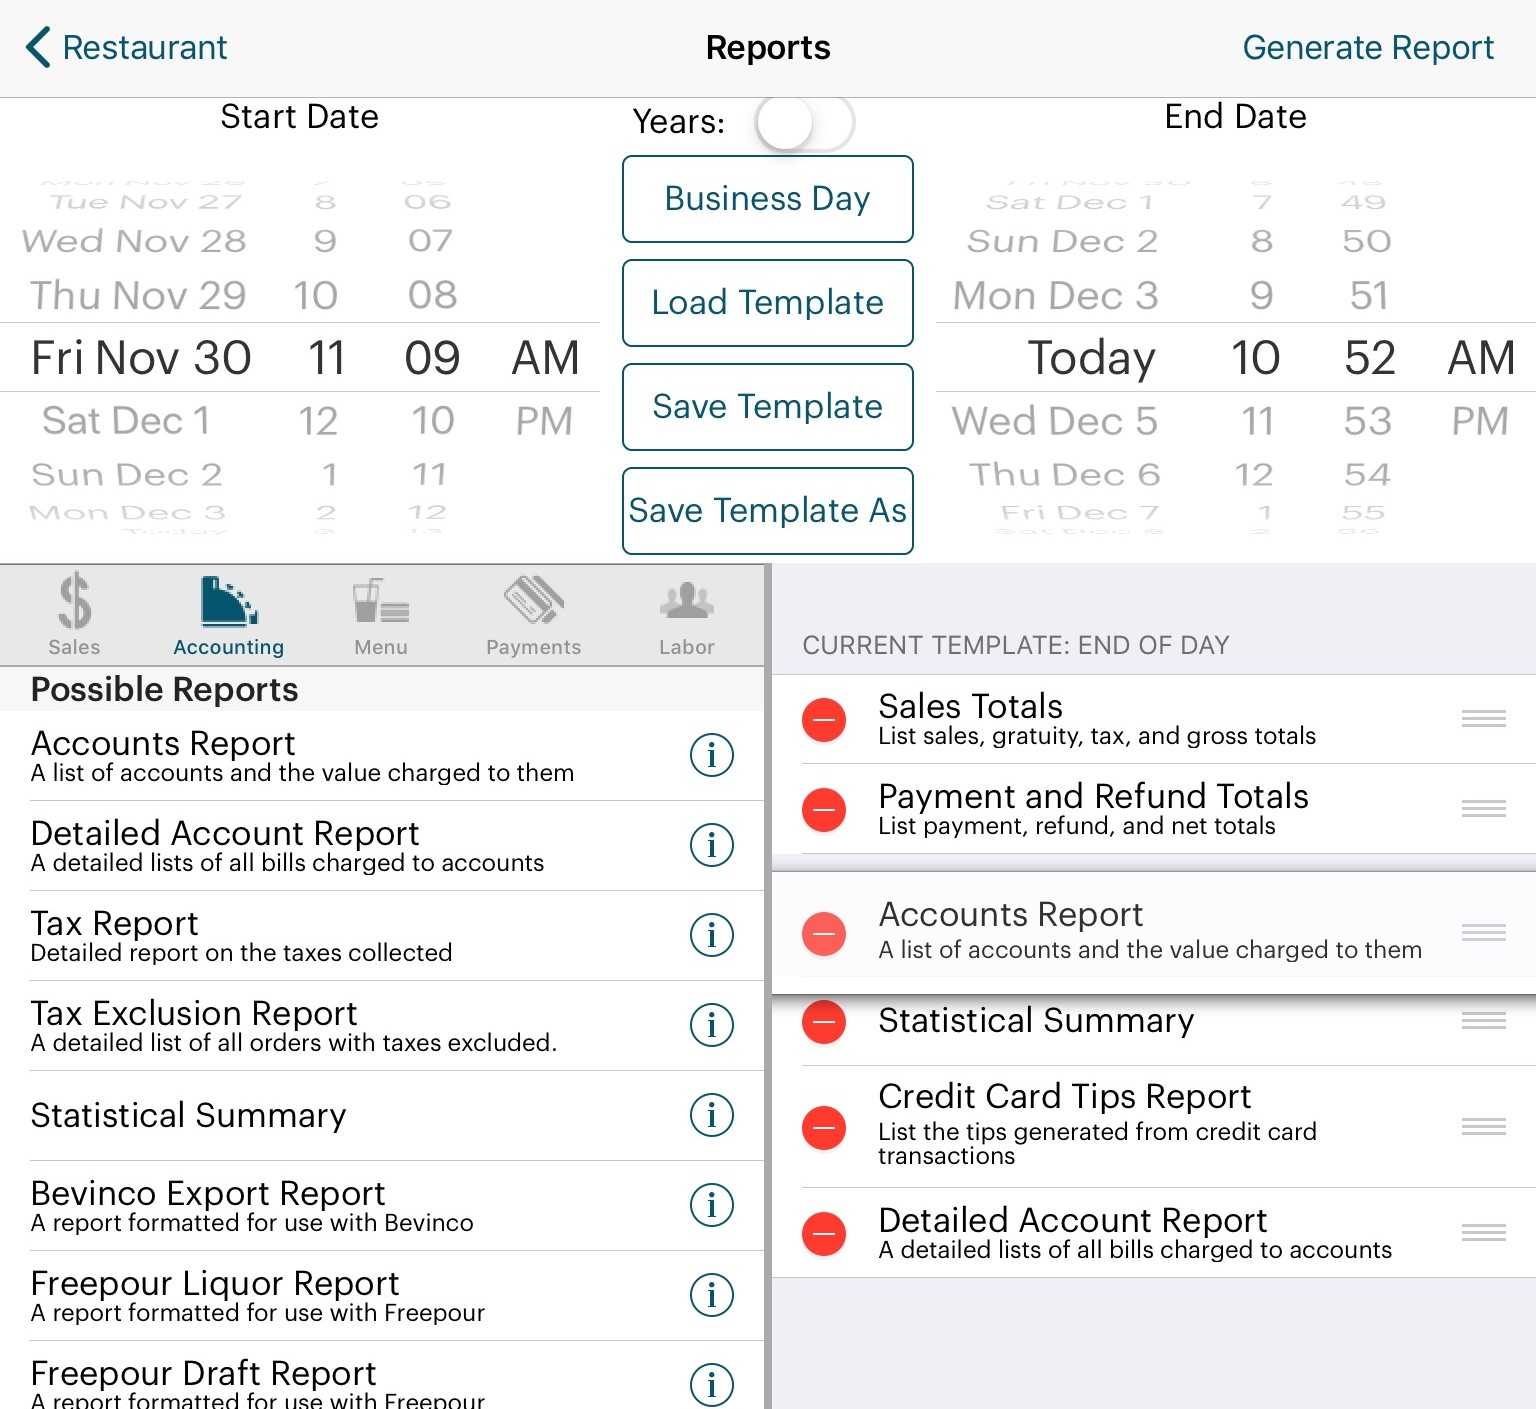 End Of Day Report Sample ] – End Of Year Report Templates Throughout Shift Report Template